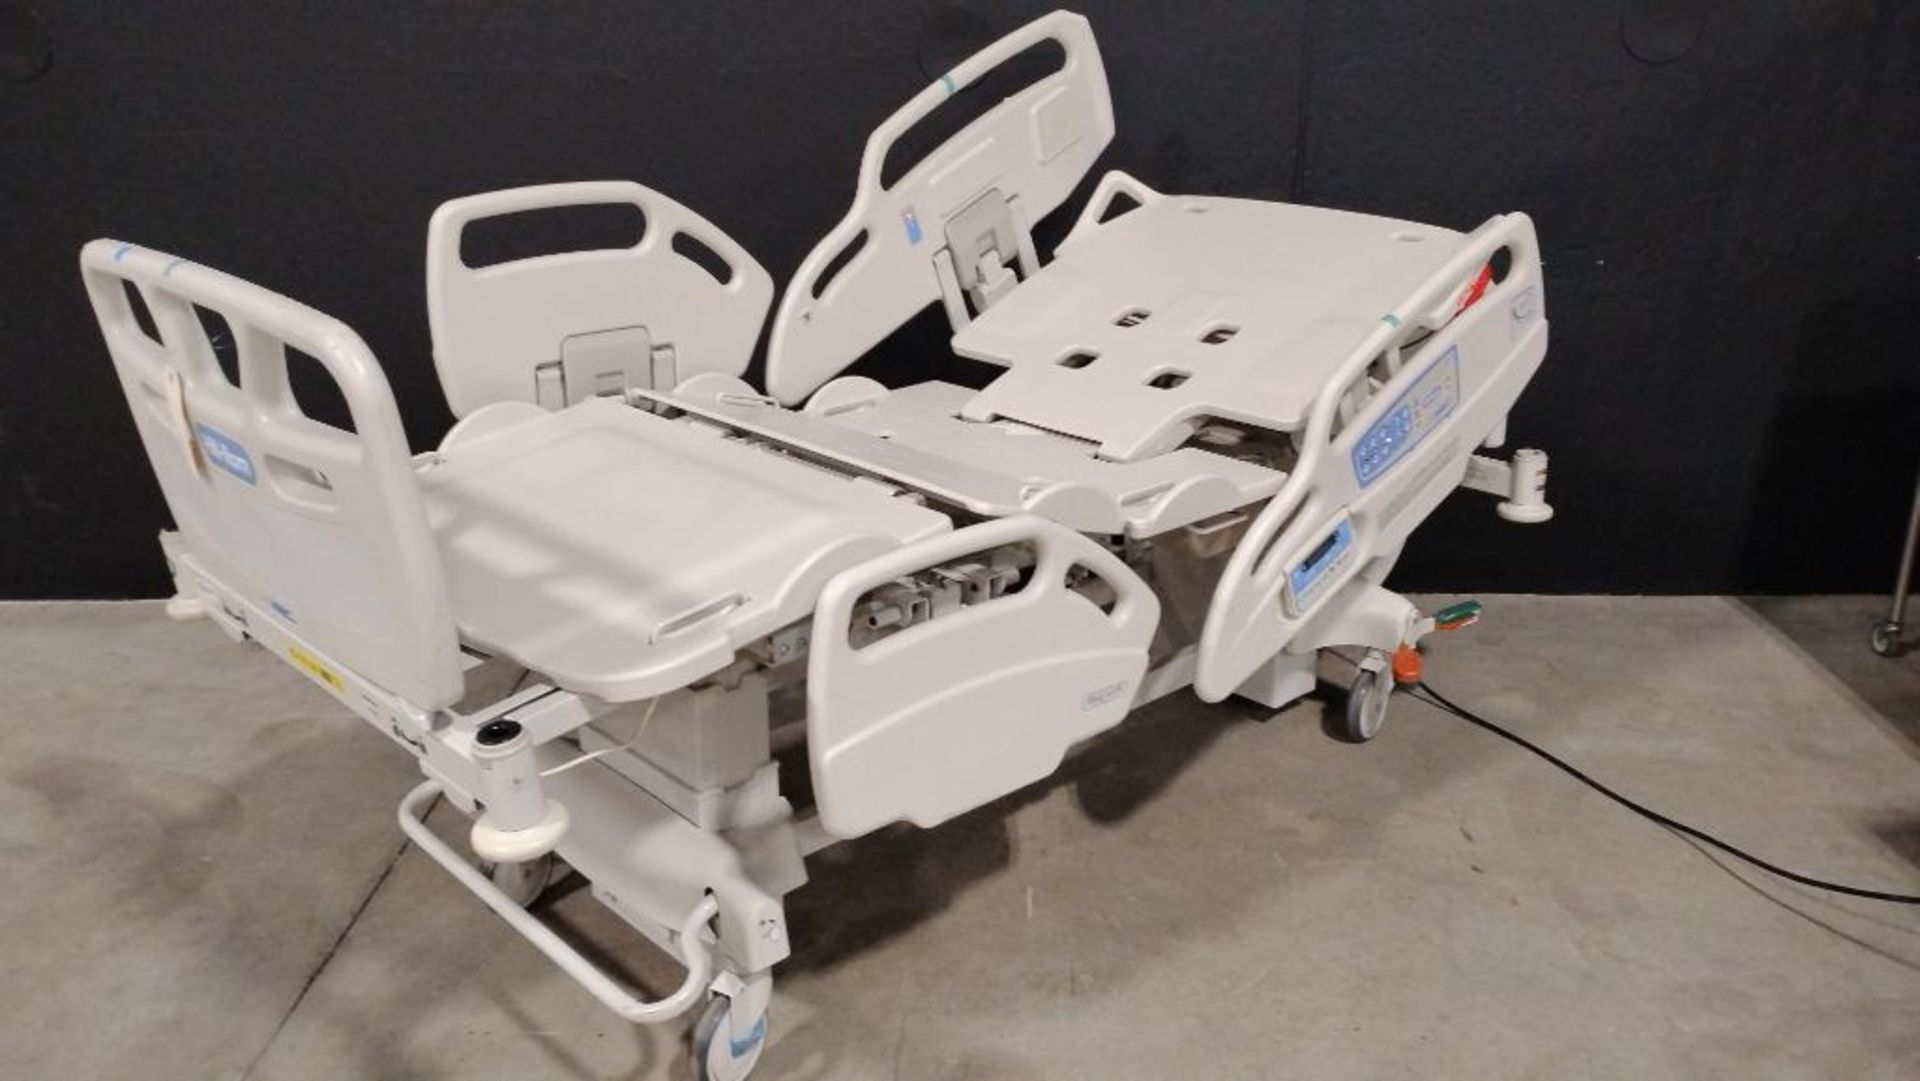 HILL-ROM CARE ASSIST ES 1170G HOSPITAL BED - Image 2 of 4